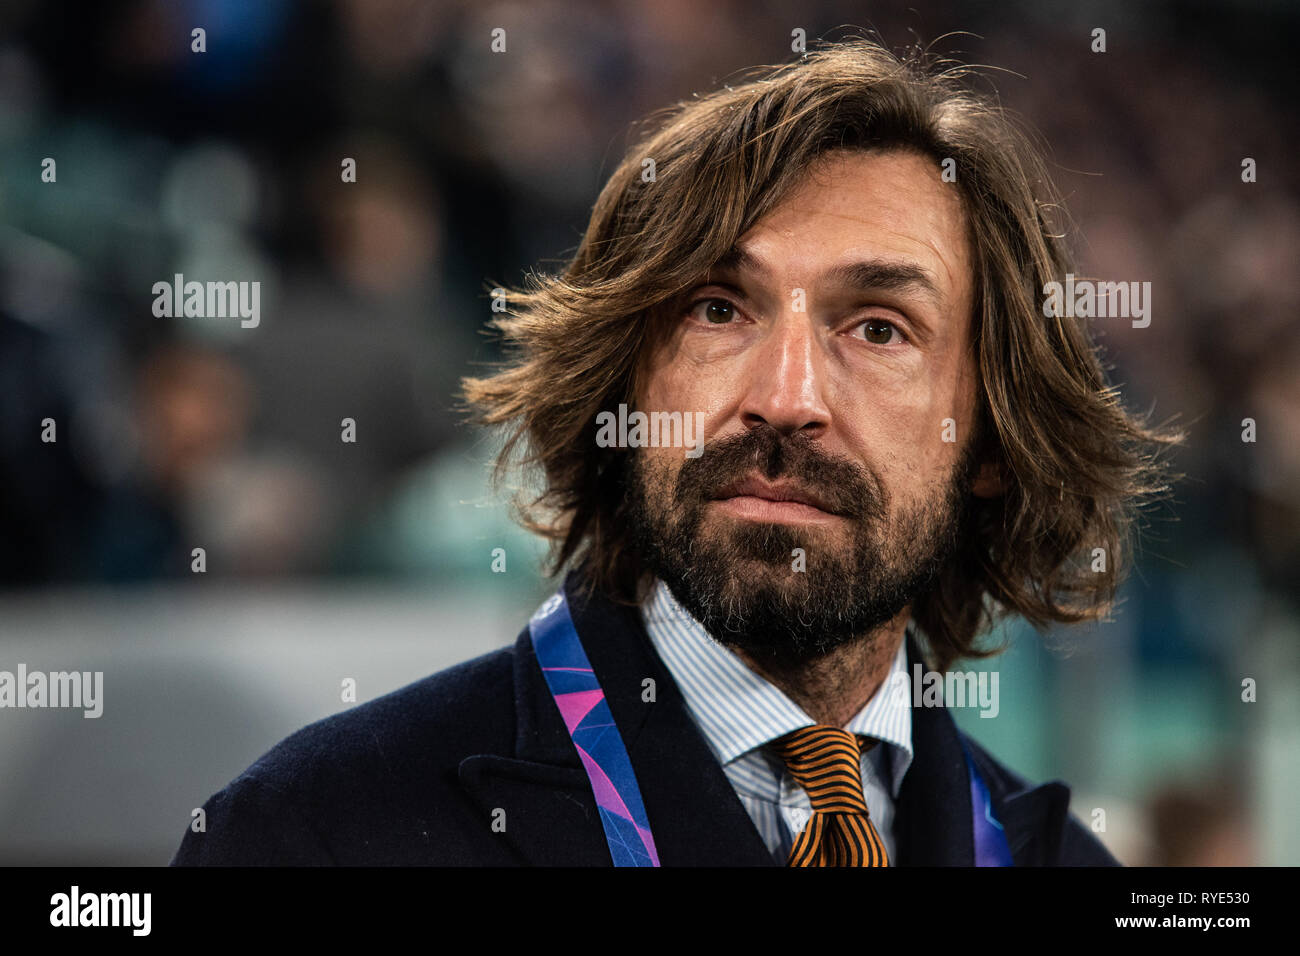 Andrea Pirlo during the Champions League match: Juventus FC vs Atletico  Madrid. Juvenwus won 3-0 in Turin, Italy 12th march 2019 (Photo by Alberto  Gandolfo/Pacific Press Stock Photo - Alamy